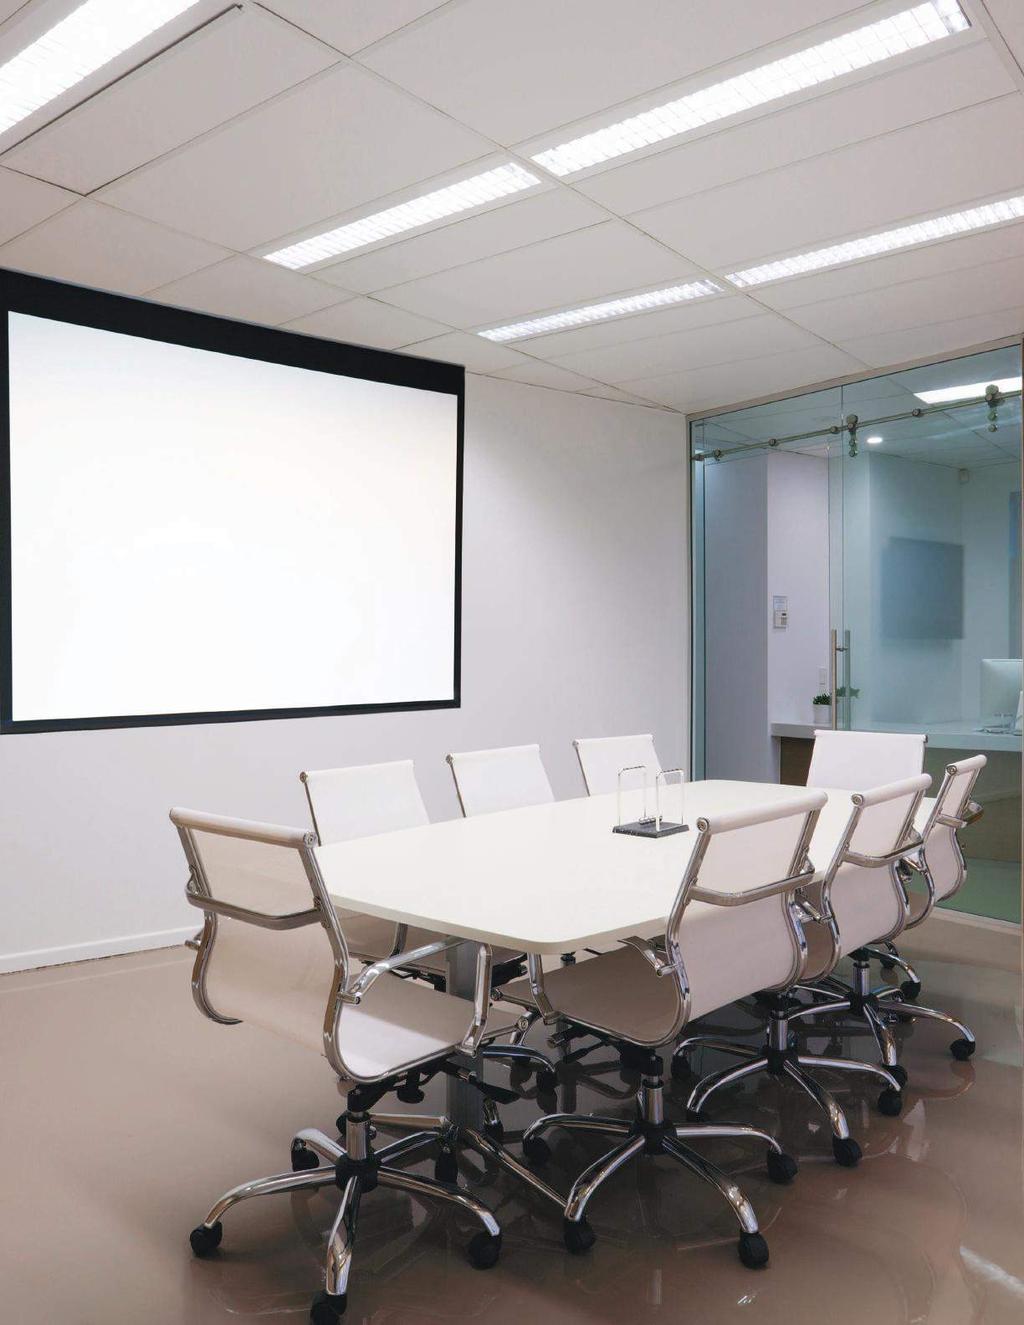 solutions and applications Atlona Meeting Room Solution An ideal AV system for small spaces, the HDVS-200 Series includes both a compact 3 1 switcher and 2 1 wall plate